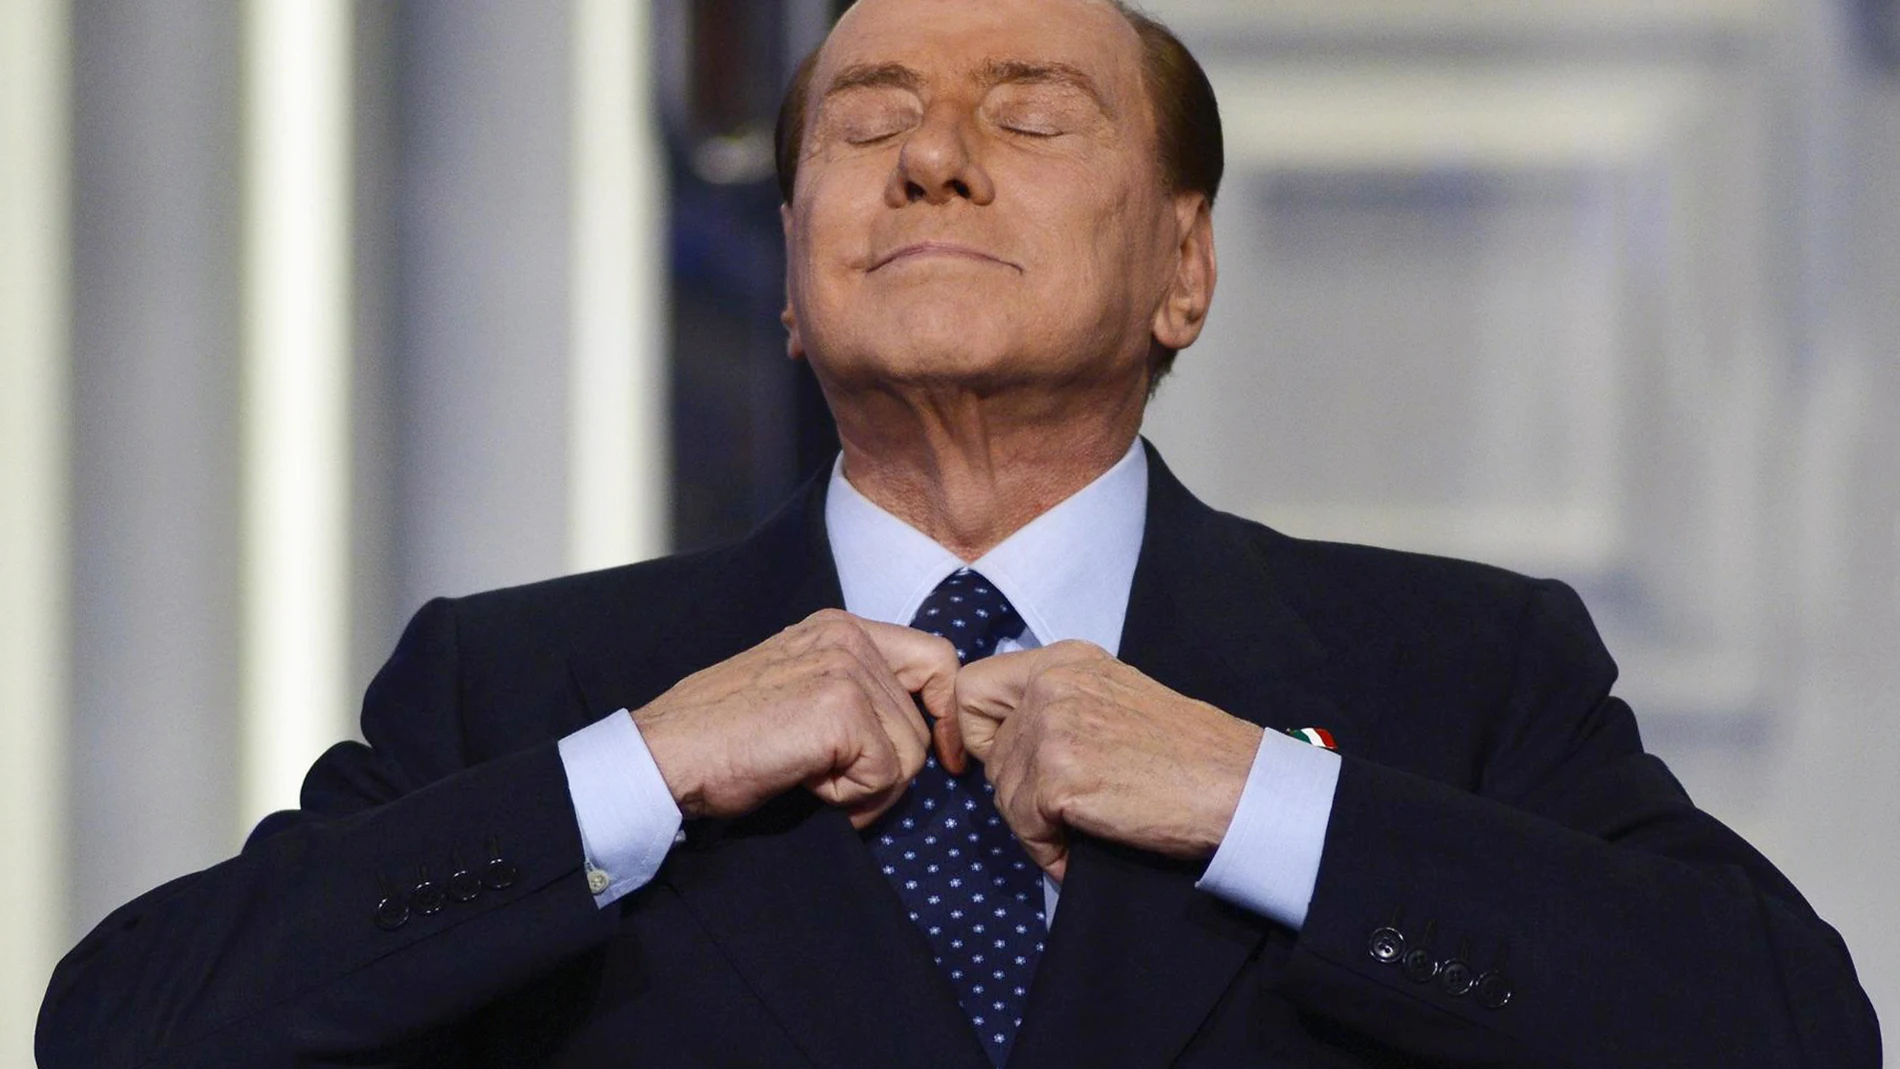 Rome (Italy), 18/12/2012.- (FILE) Former Italian Prime Minister Silvio Berlusconi adjusting his tie during the recording of the Italian Rai 1 television program 'Porta a porta', in Rome, Italy, 18 December 2012 (reissued 12 June 2023). Silvio Berlusconi has died at the age of 86 on 12 June 2023 at San Raffaele hospital in Milan, where he was hospitalized again since last 09 June, sources close to his family told ANSA. The Italian media tycoon and Forza Italia (FI) party founder served as prim...